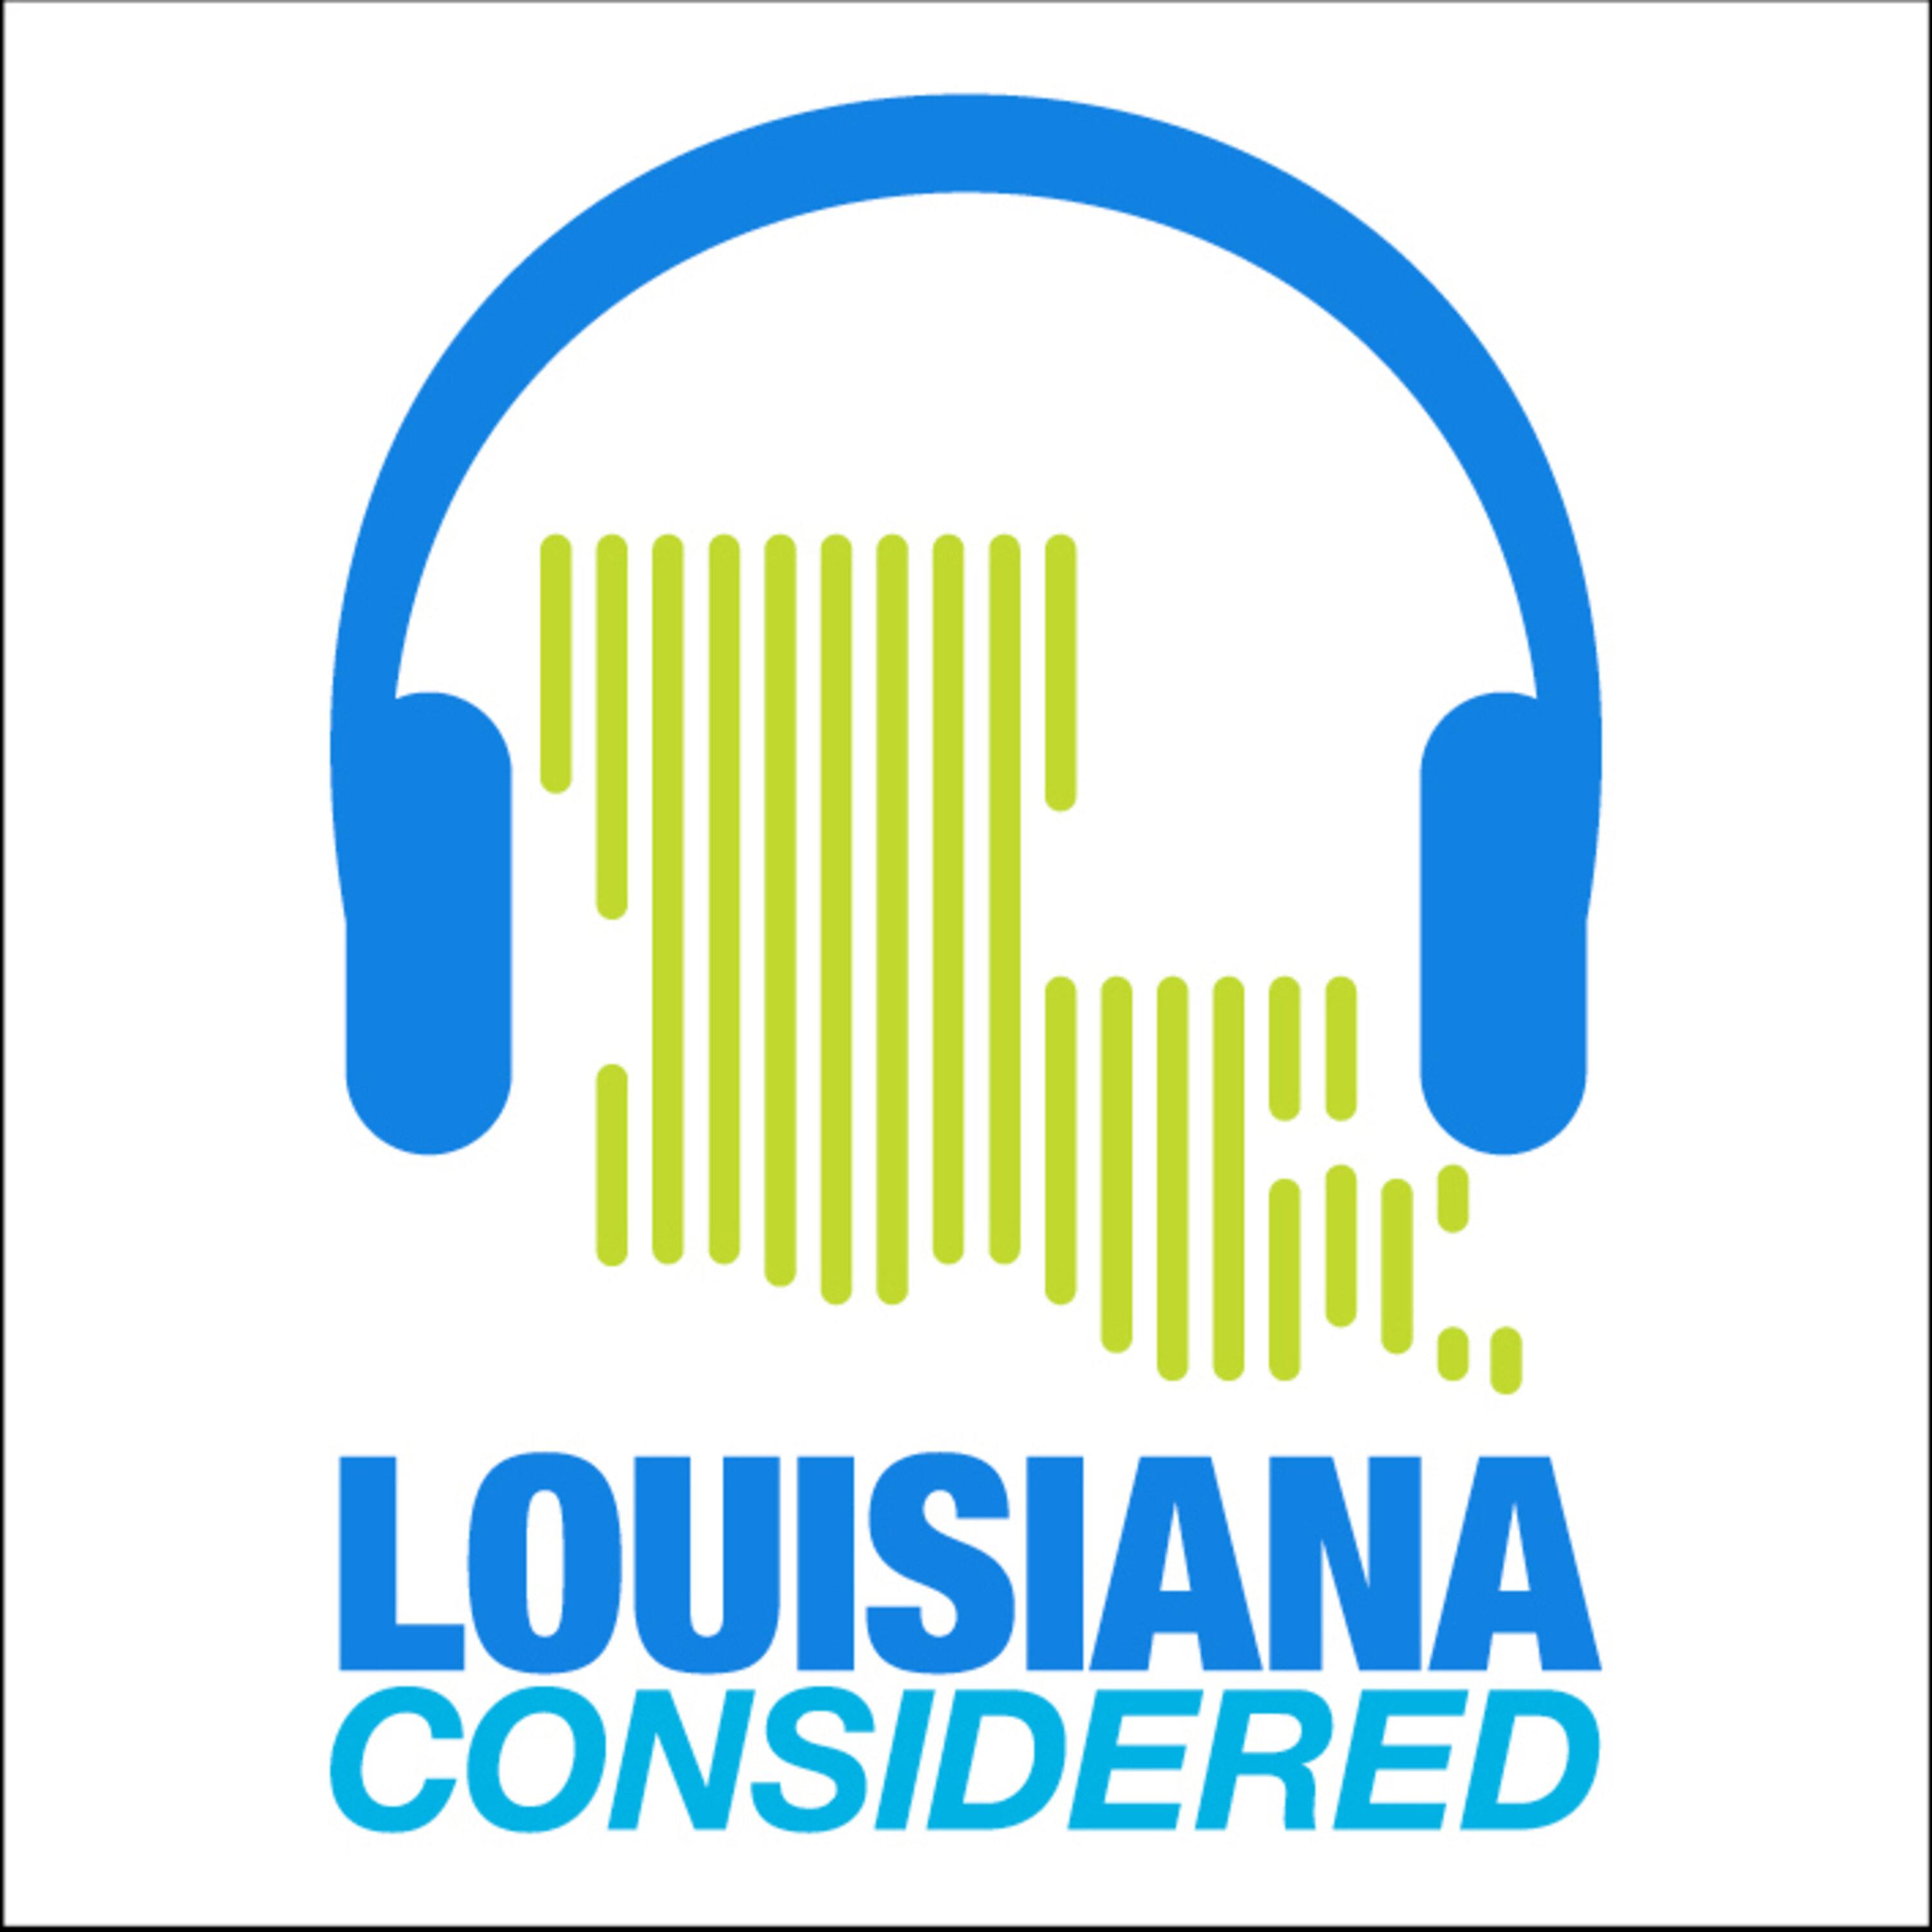 Thumbnail for "Louisiana Considered: Housing Instability In New Orleans, Louisiana ICE Facilities Drop Off Waves Of Detainees At Rural Airports And Bus Stops".